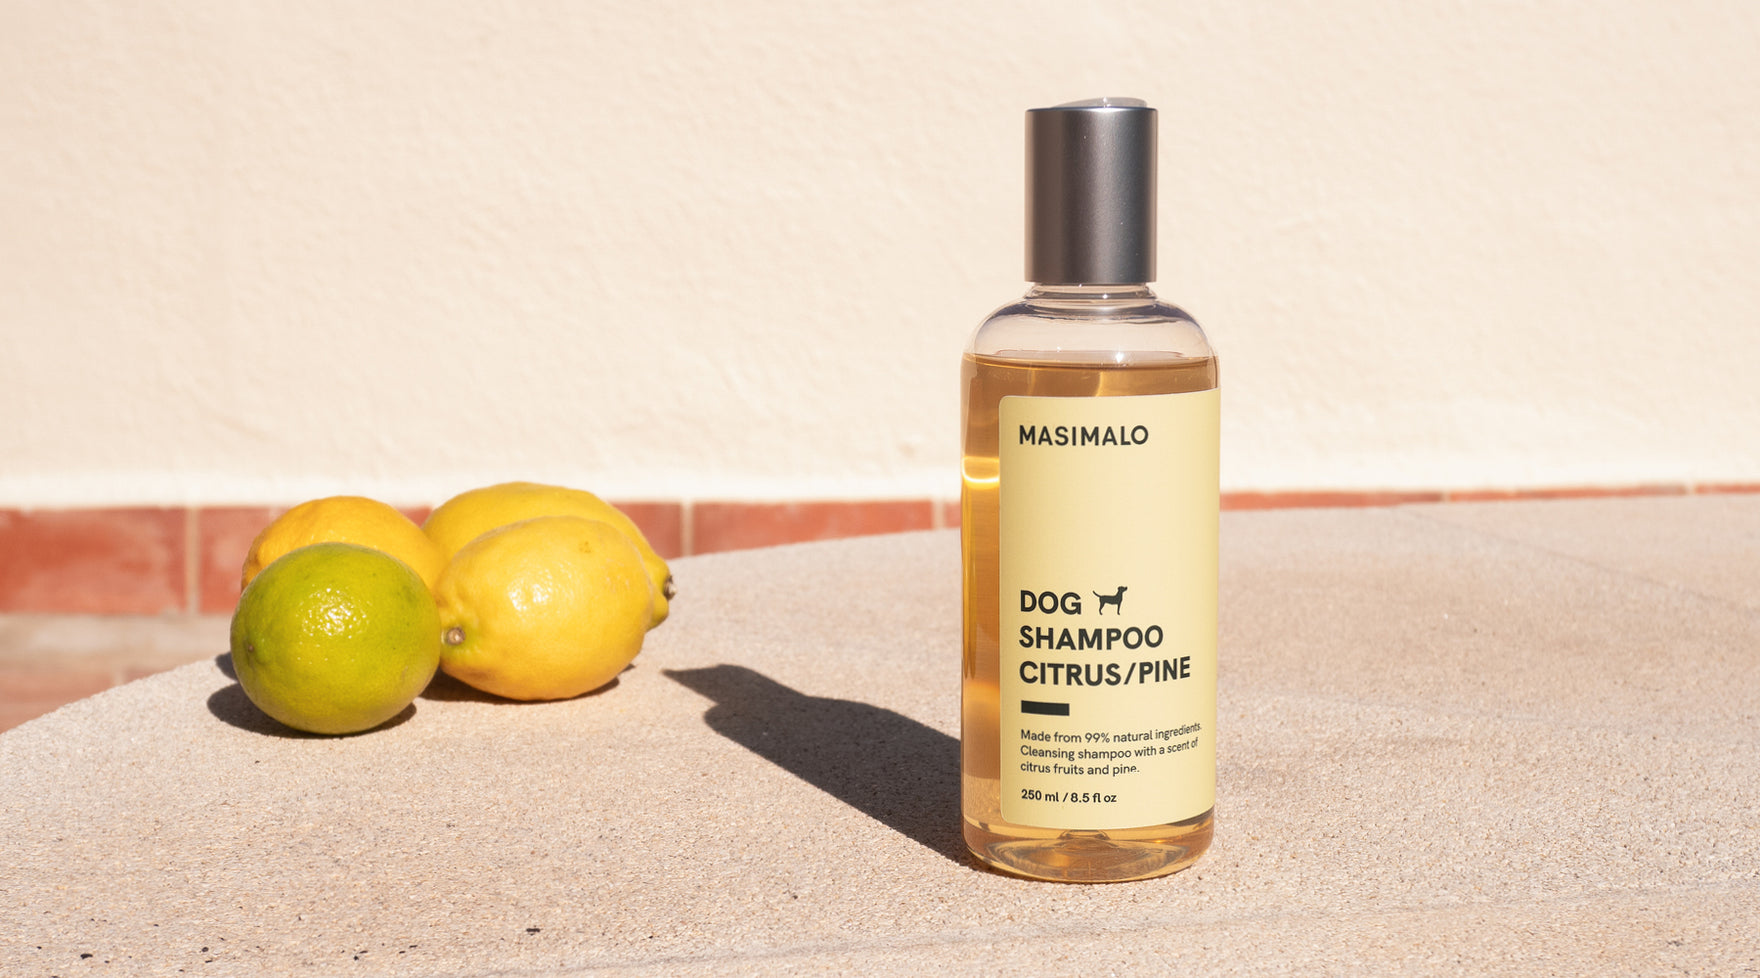 WHAT SHAMPOO SCENT DOES YOUR DOG PREFER?